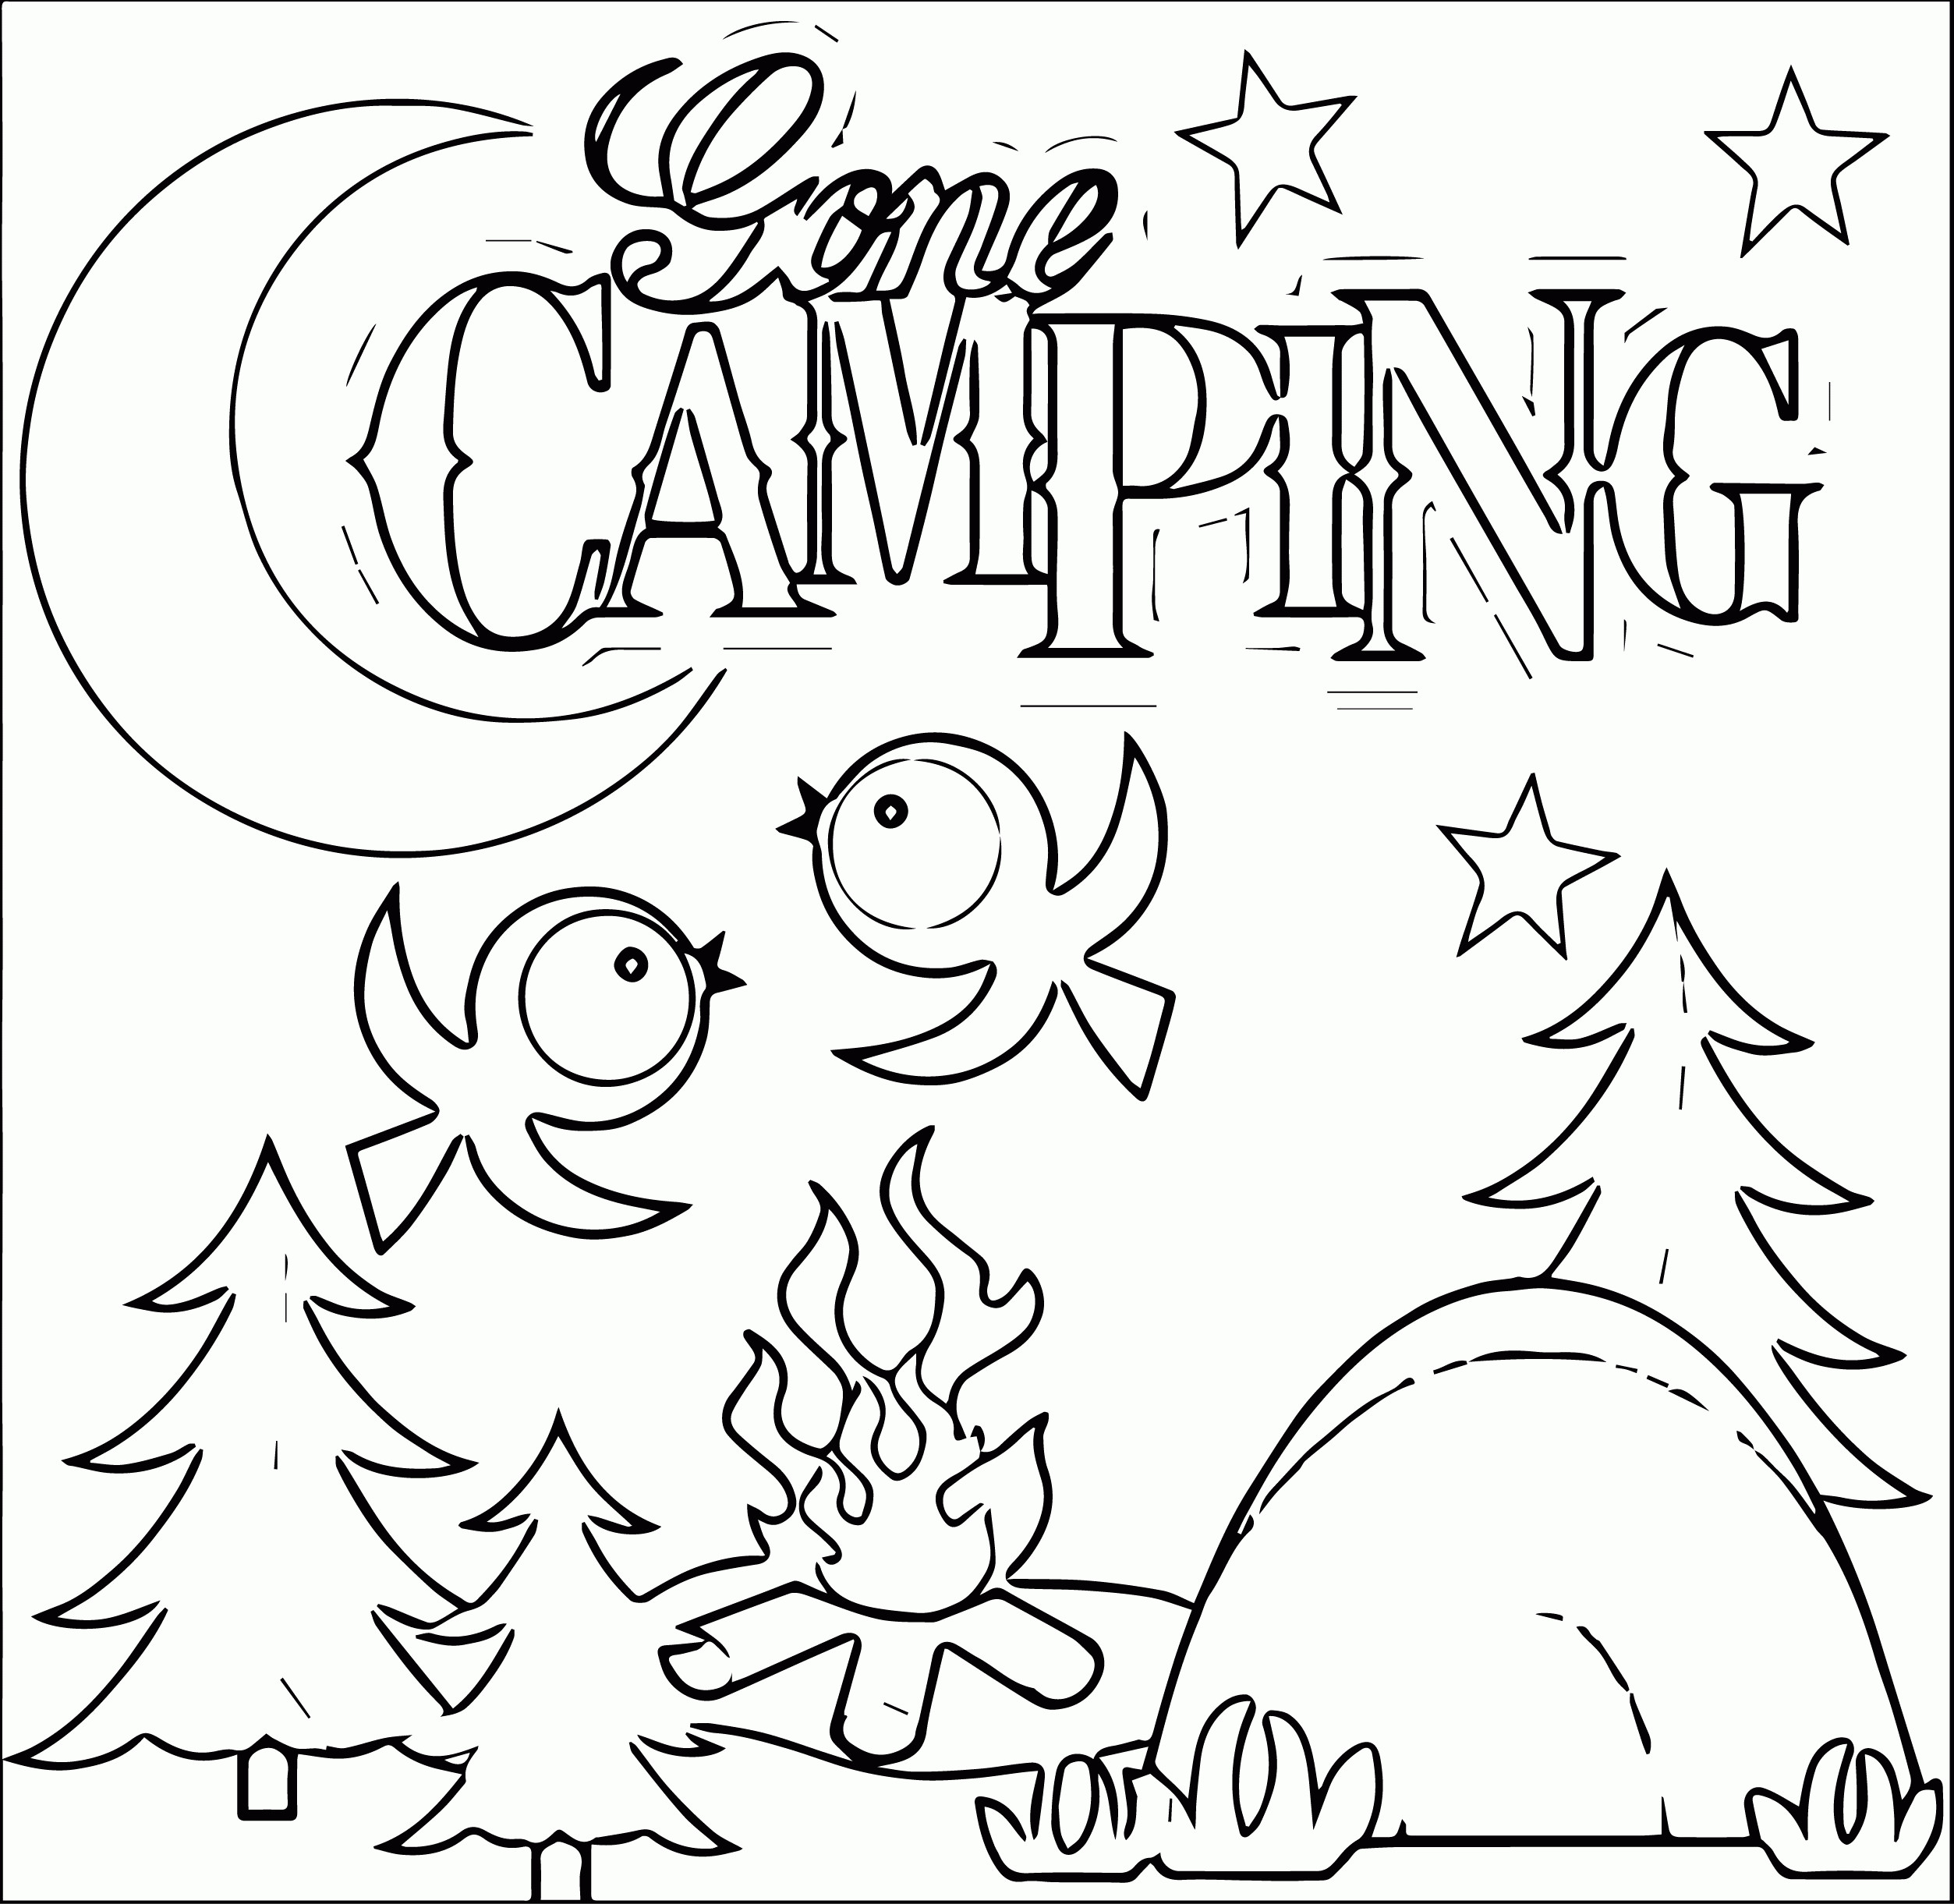 Camping Coloring Pages For Kids
 Camping Coloring Pages Best Coloring Pages For Kids